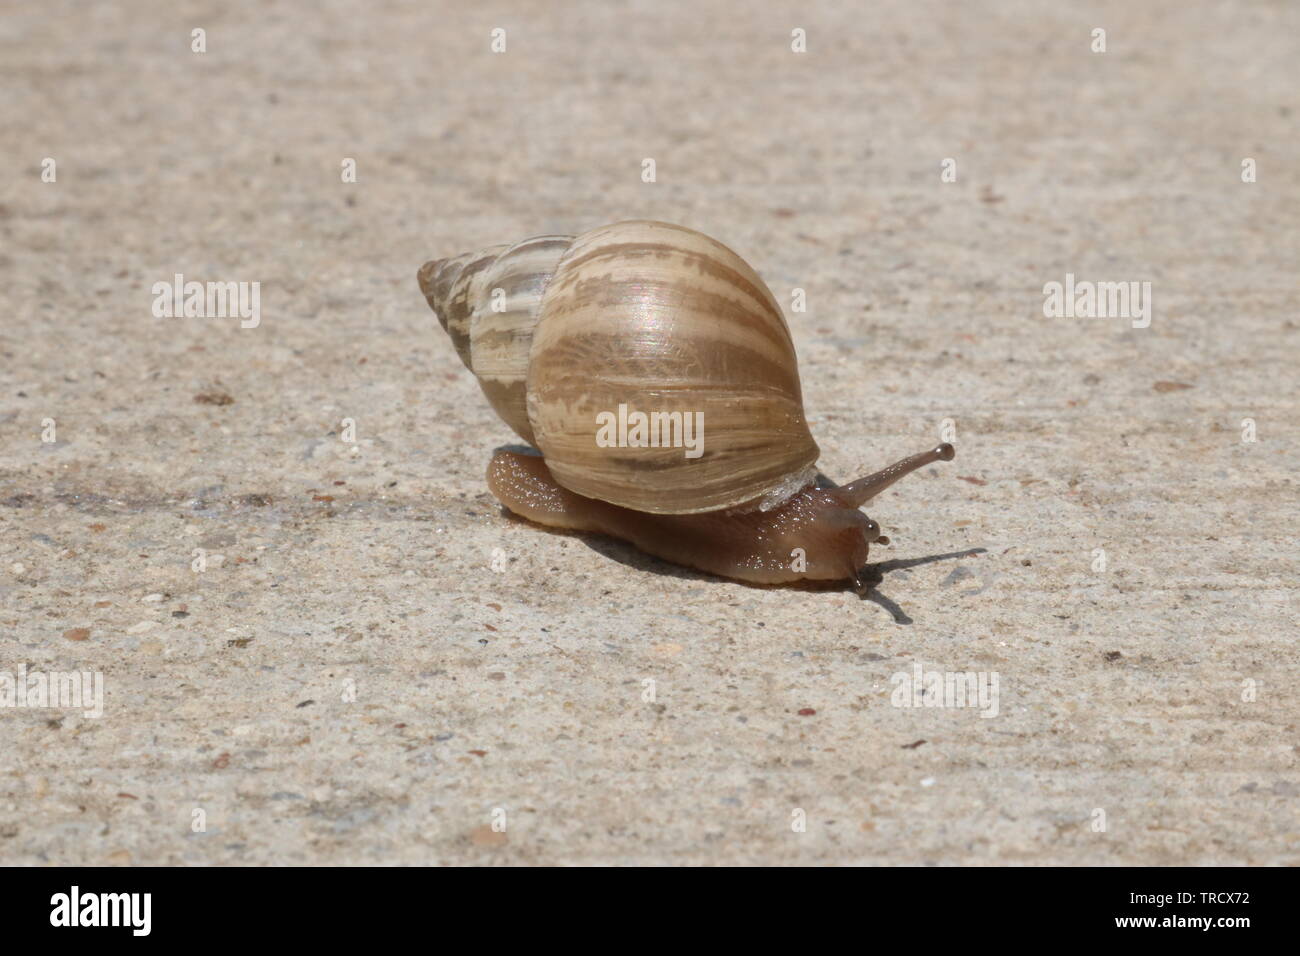 Snail leaving a slime trail Stock Photo